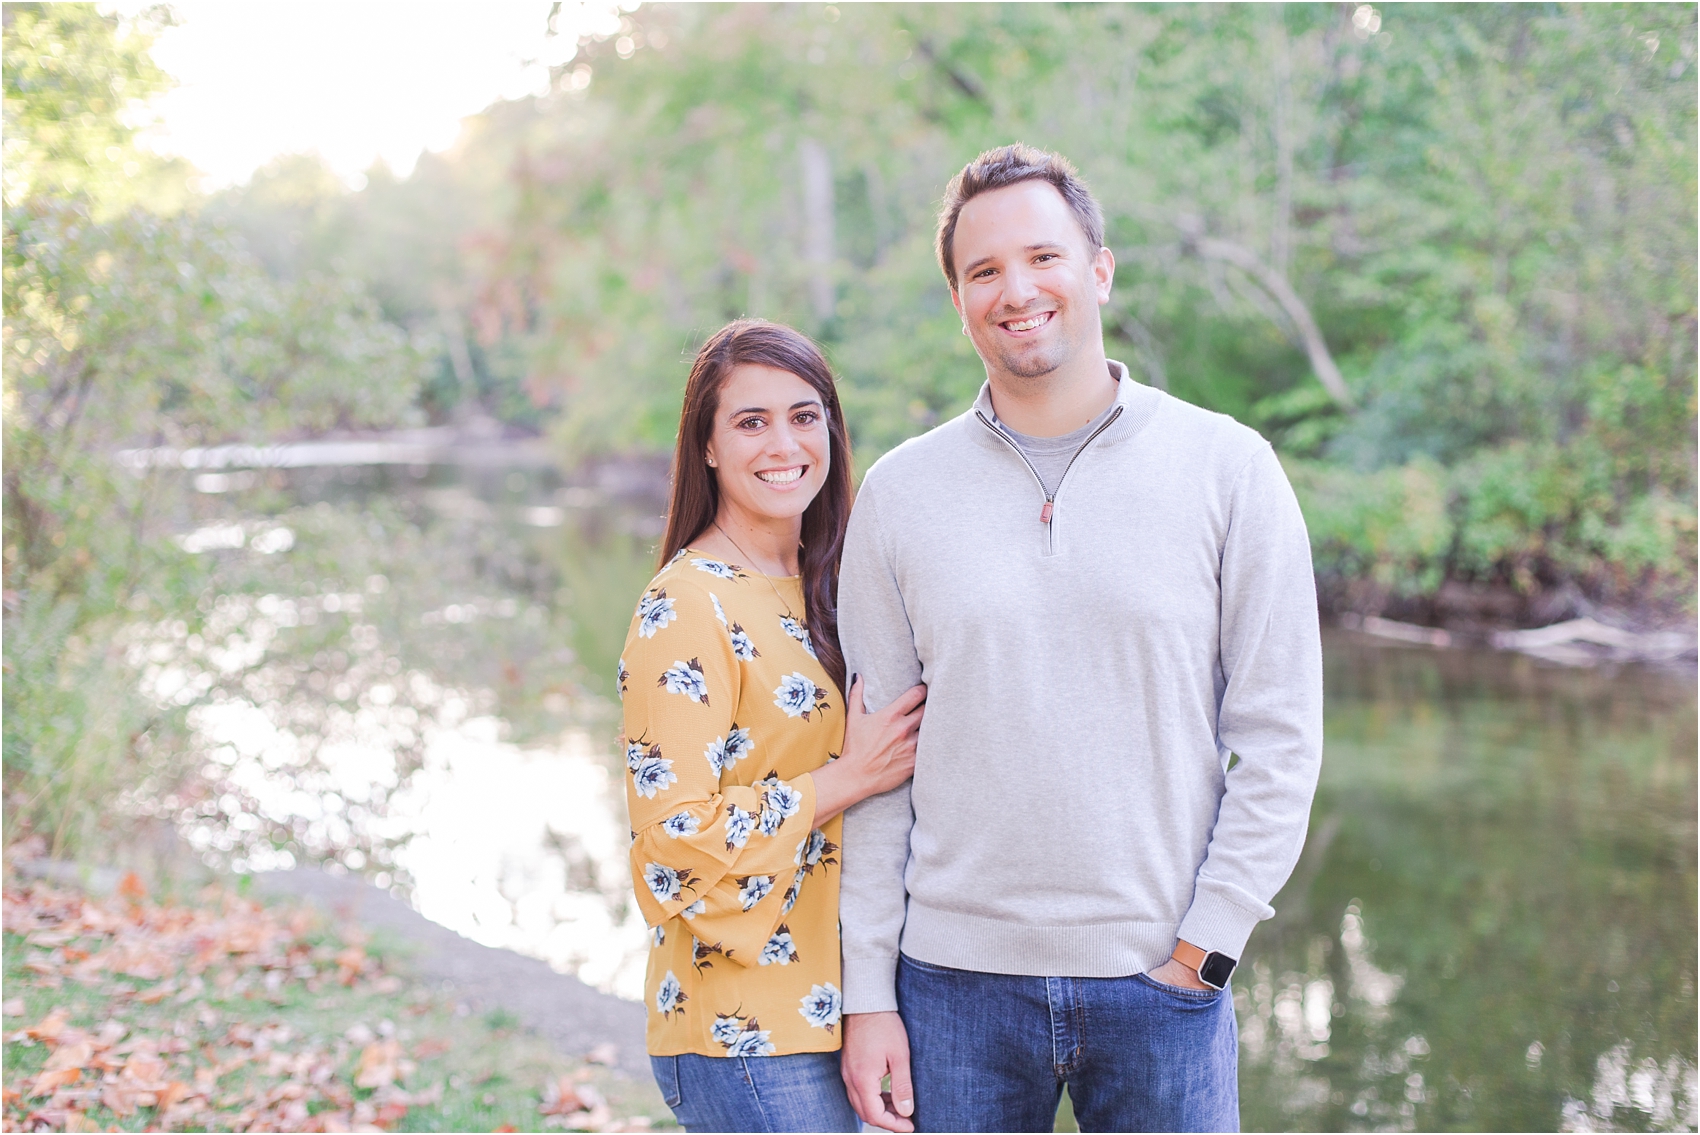 relaxed-autumn-engagement-photos-at-hudson-mills-metropark-in-dexter-mi-by-courtney-carolyn-photography_0033.jpg